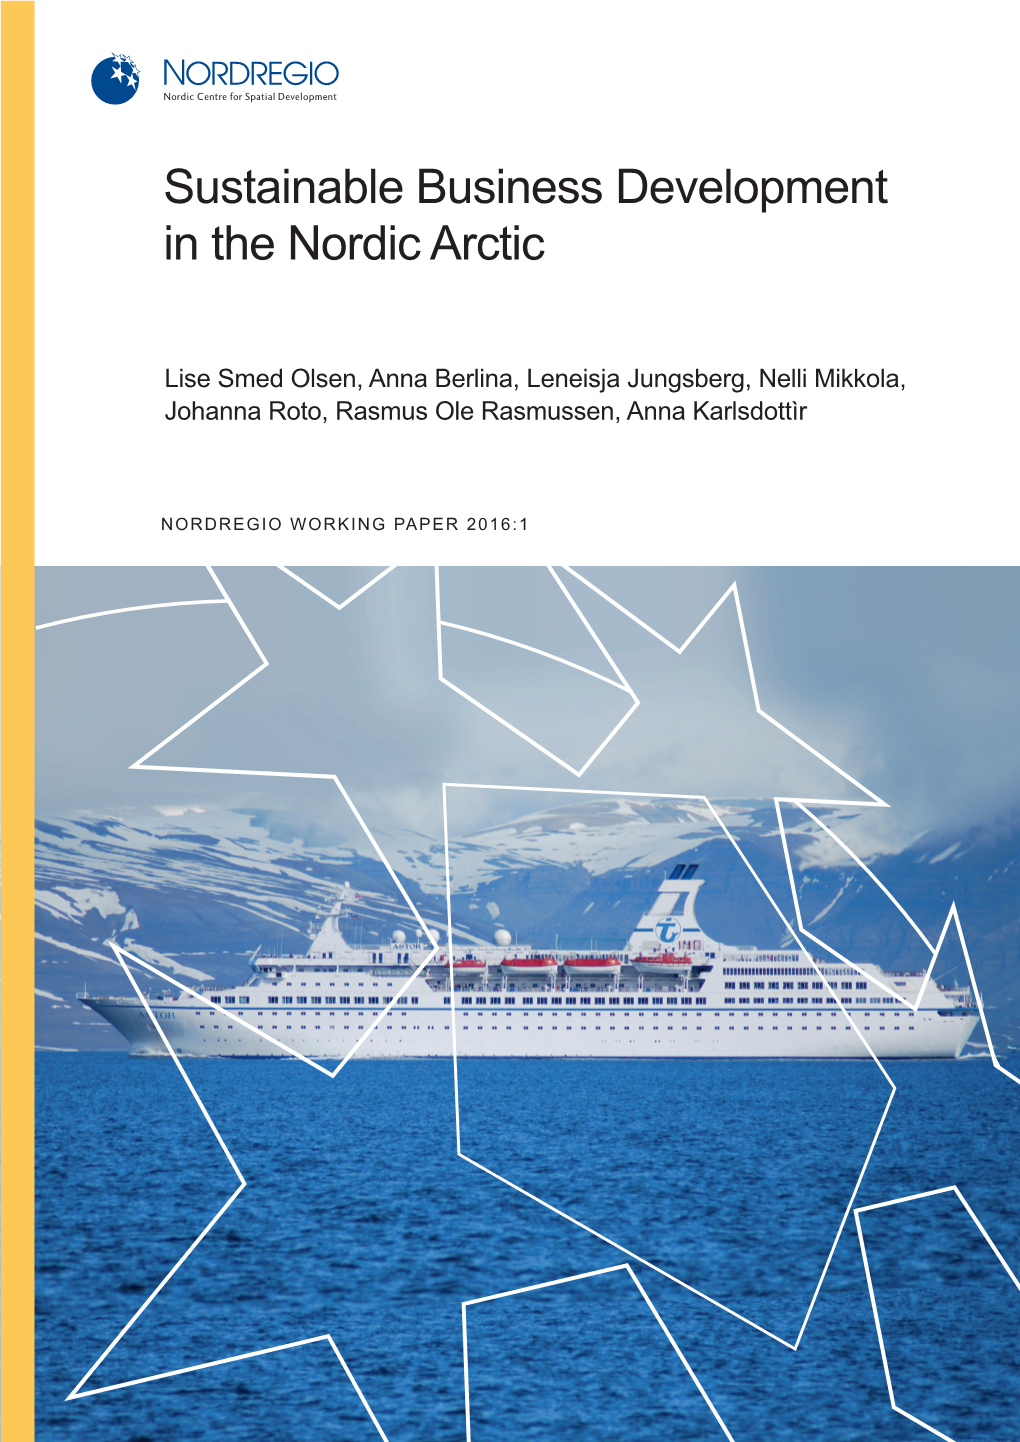 Sustainable Business Development in the Nordic Arctic